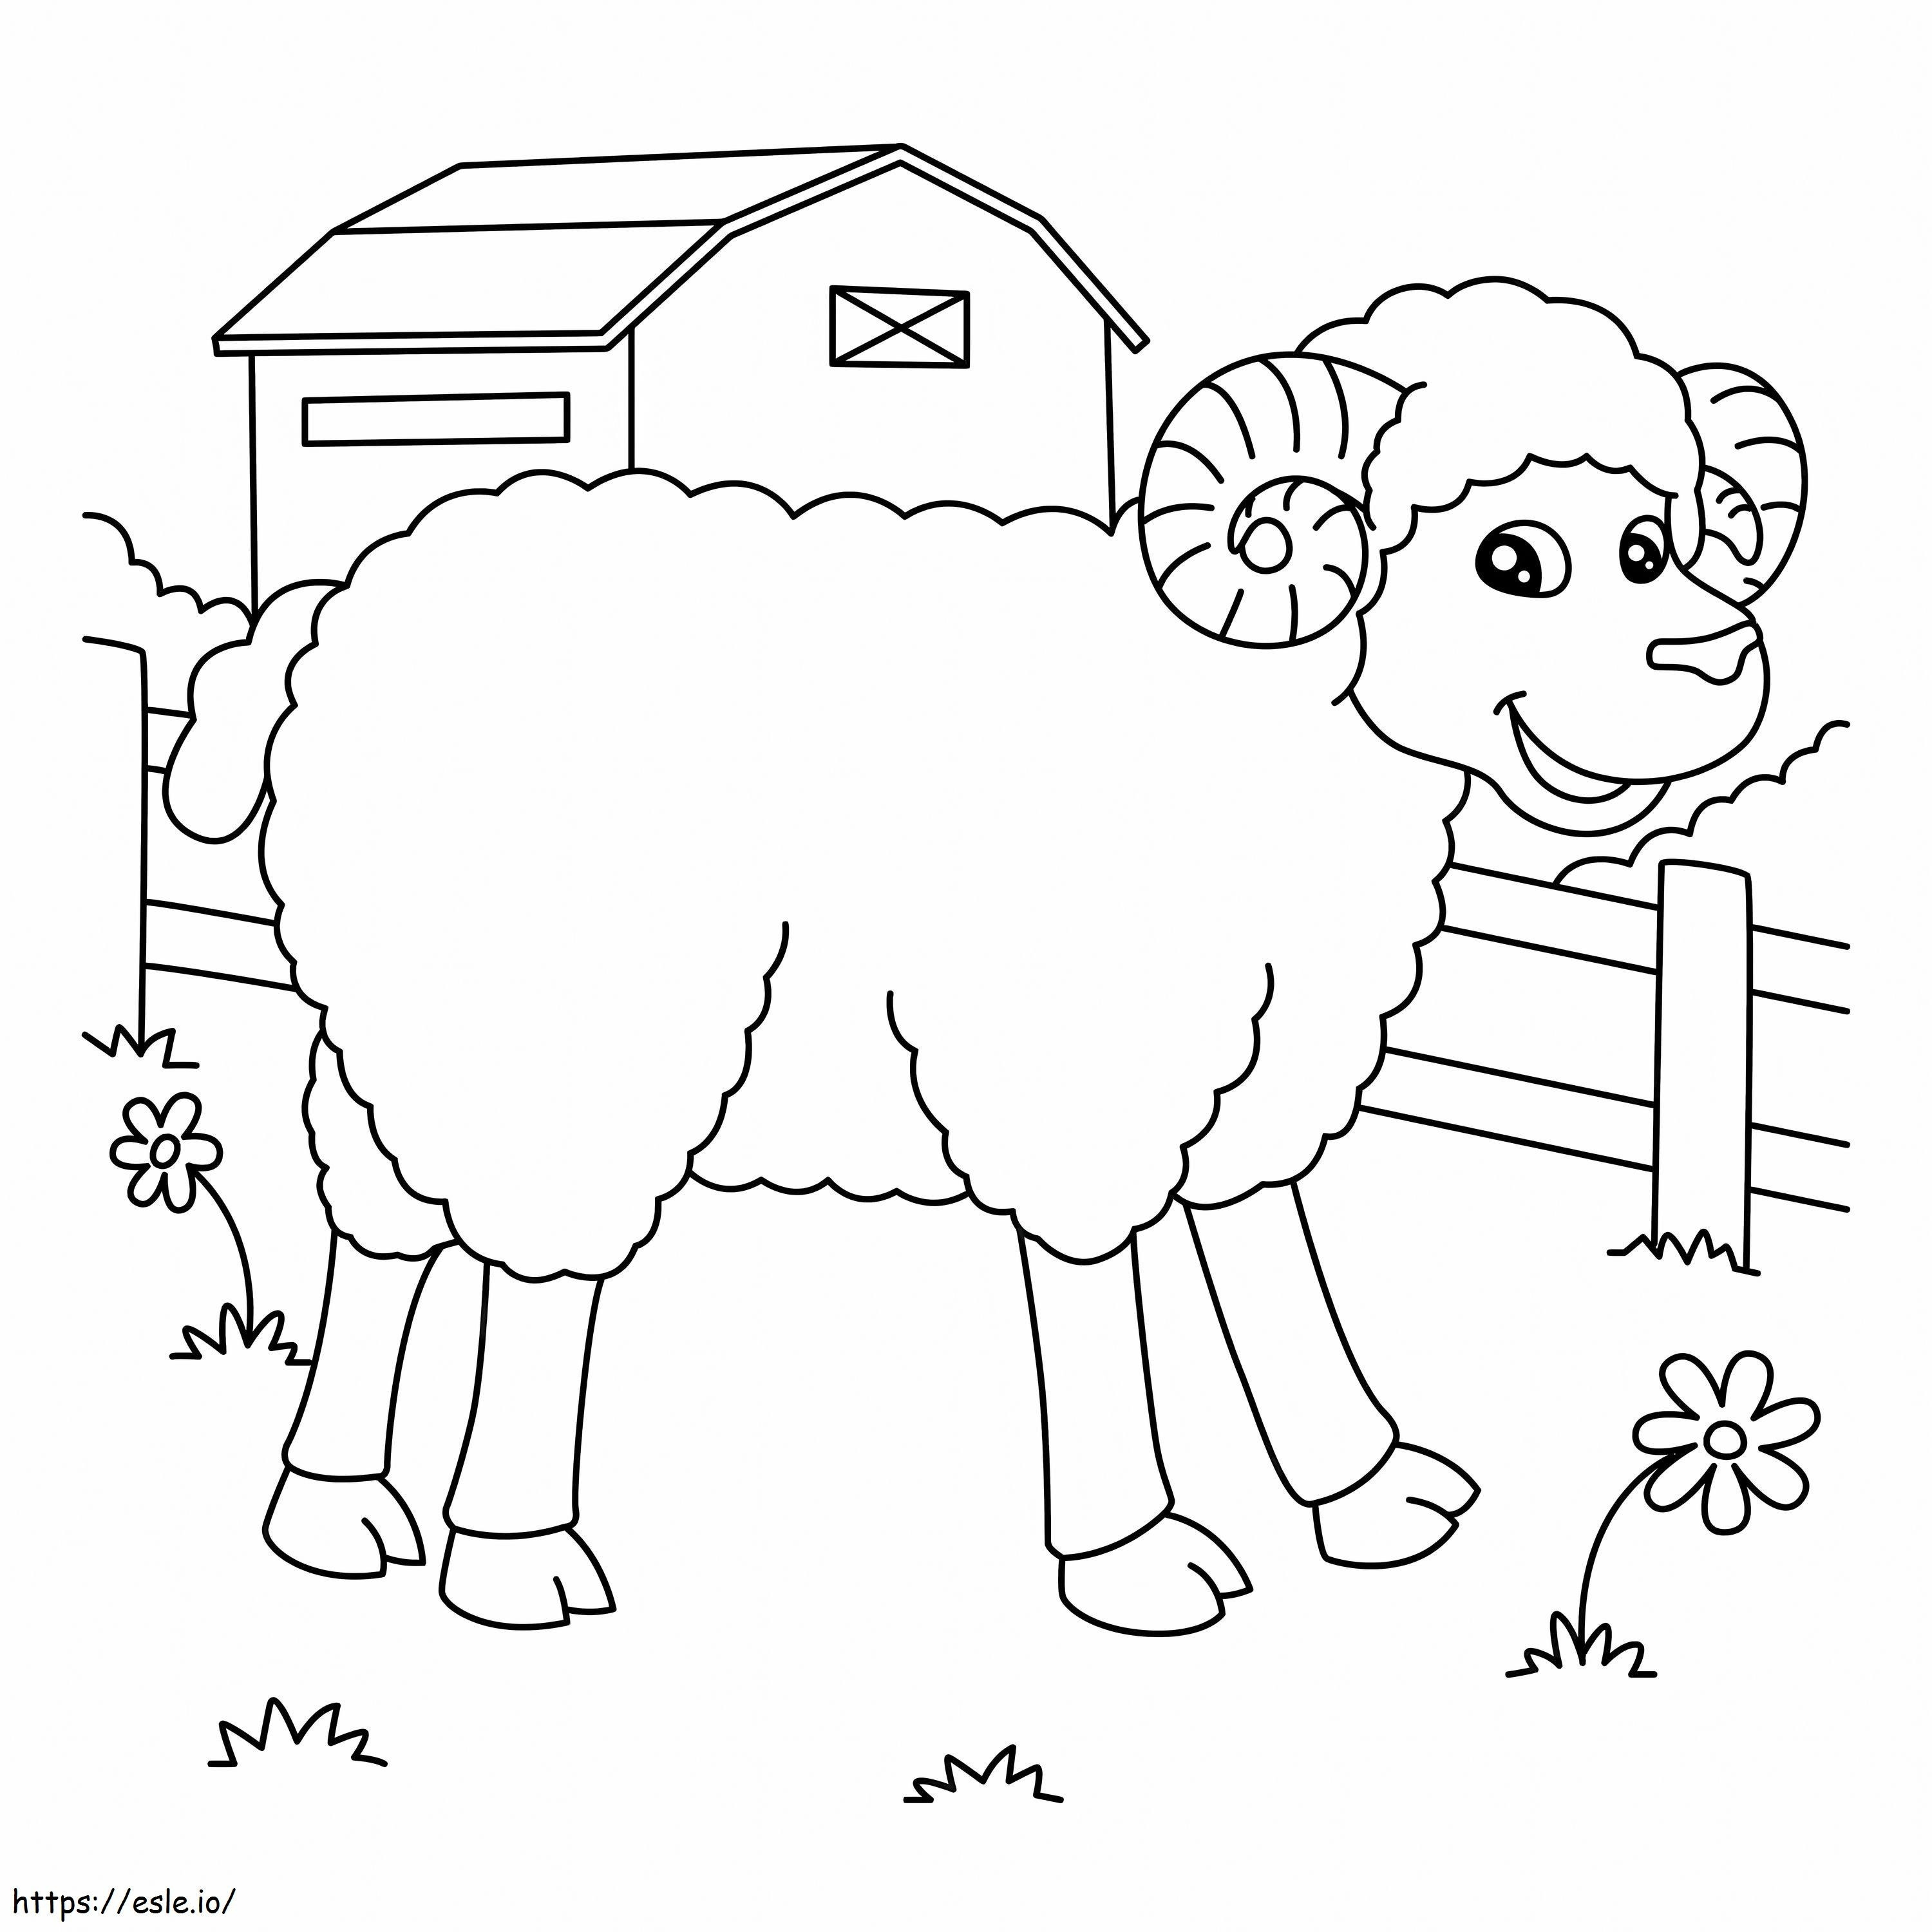 Funny Sheep coloring page